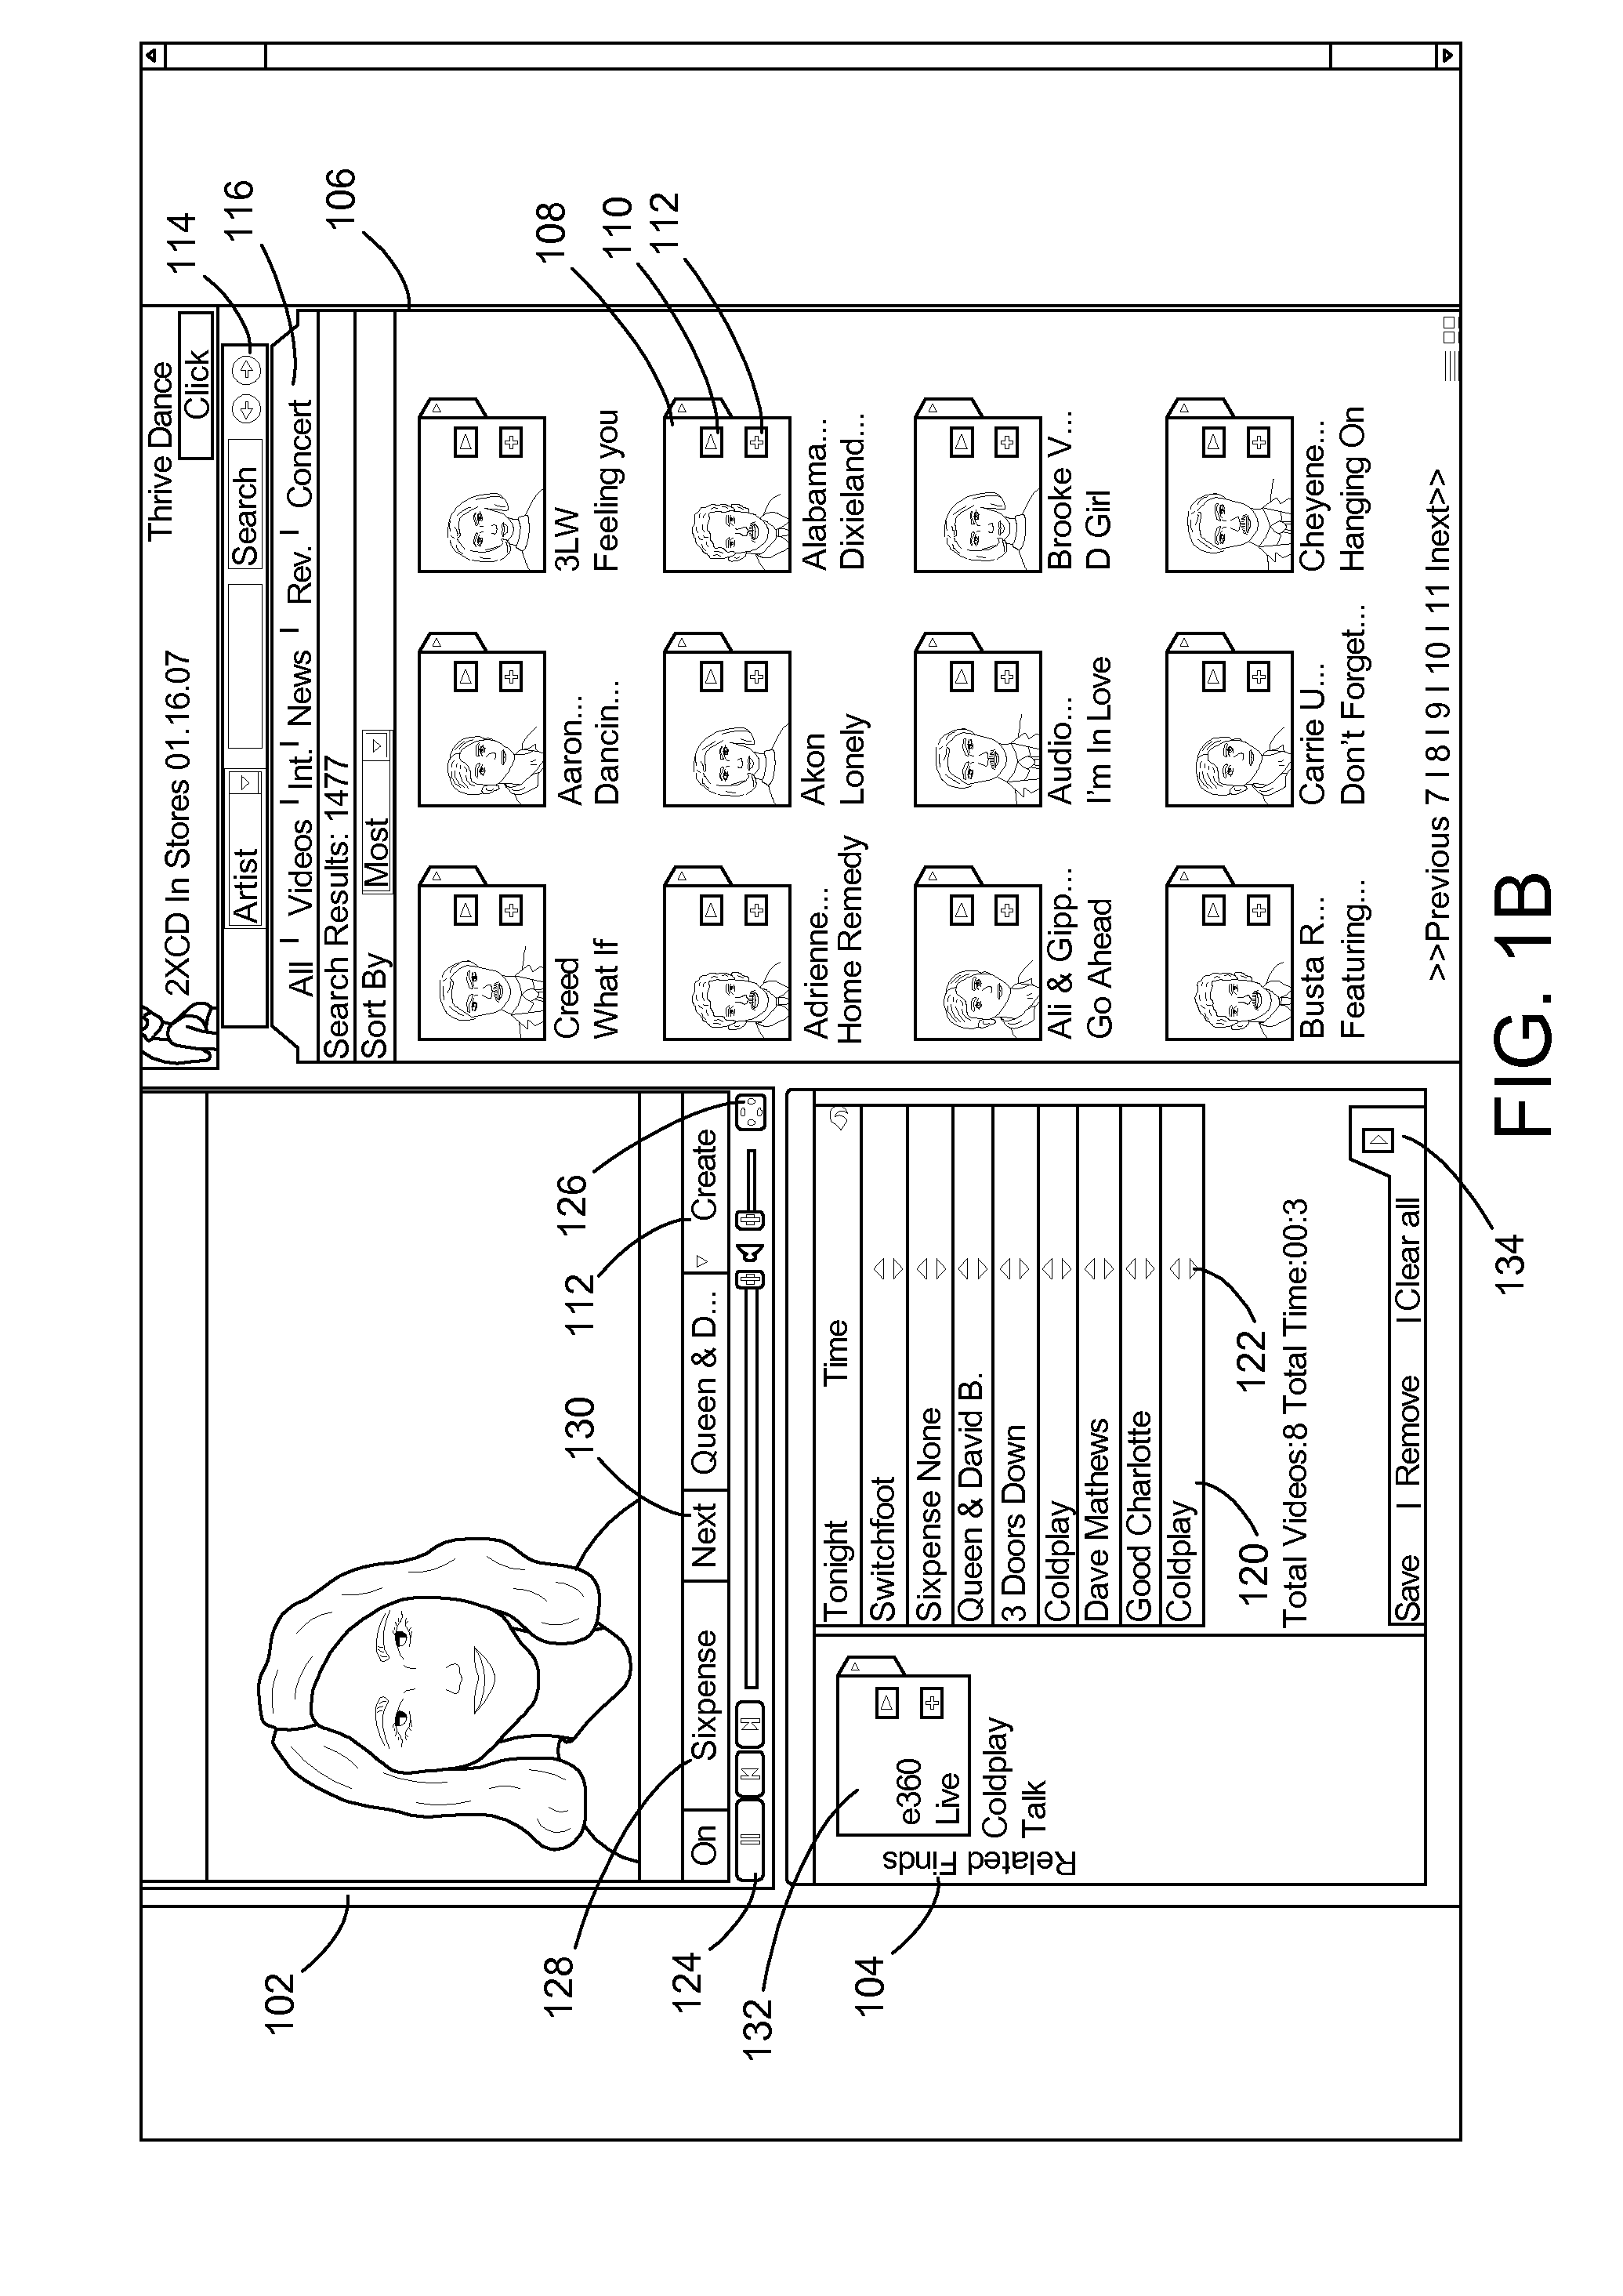 Method and apparatus for providing continuous playback of media programs at a remote end user computer